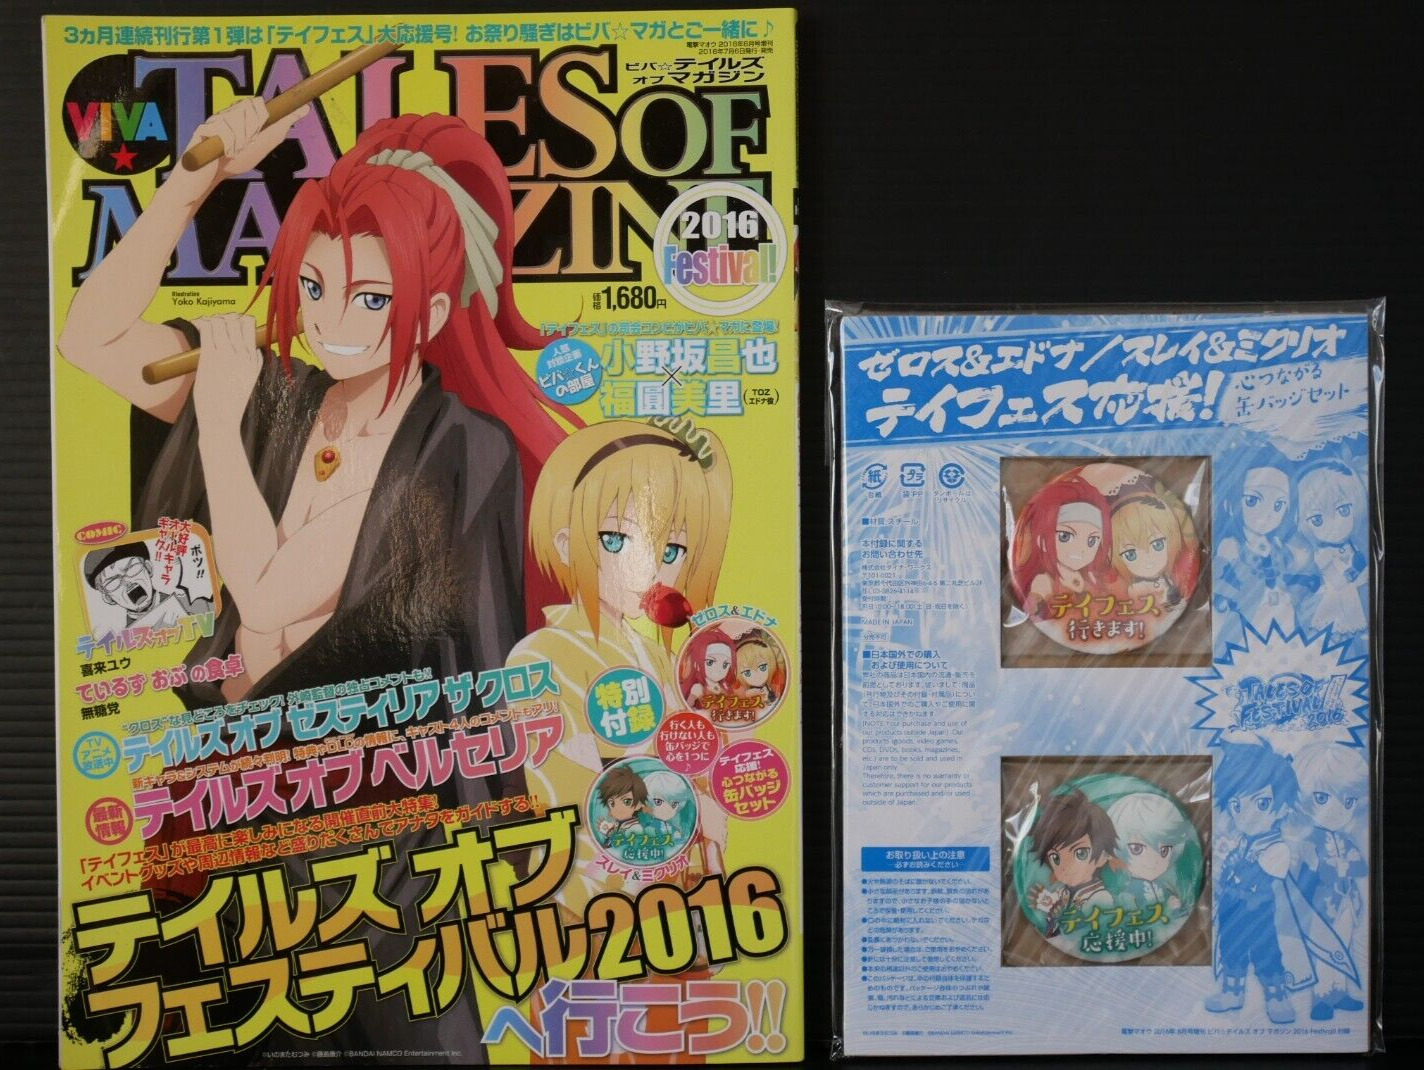 VIVA Tales of Magazine 2016 Festival With Can Badge - from JAPAN